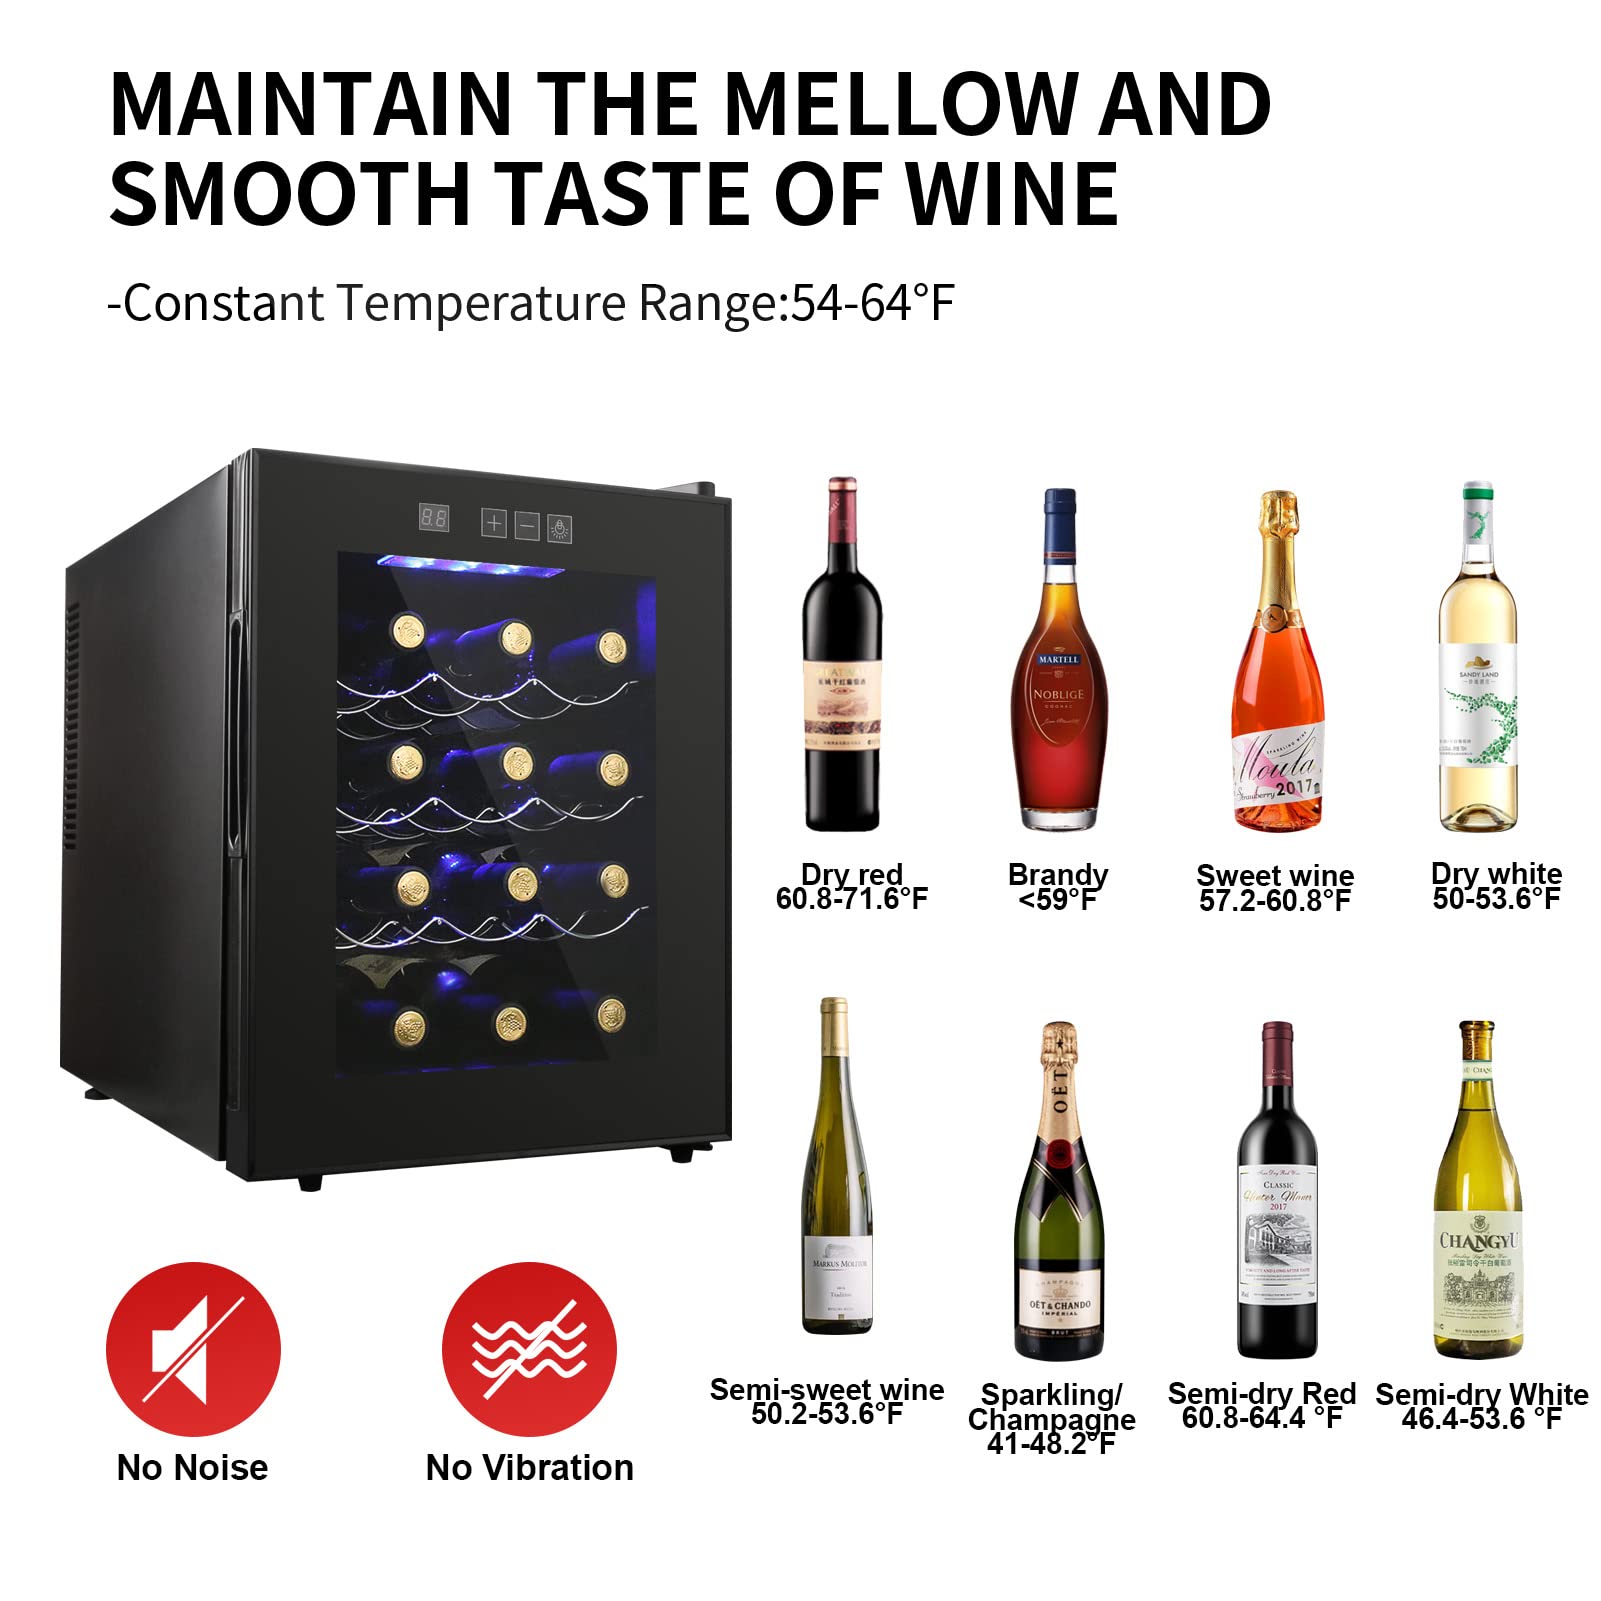 12 Bottle Wine Cooler Refrigerator, Compact Mini Wine Fridge with Digital Temperature Control Quiet Operation Thermoelectric Chiller, Freestanding Wine Cellar for Red, White, Champagne